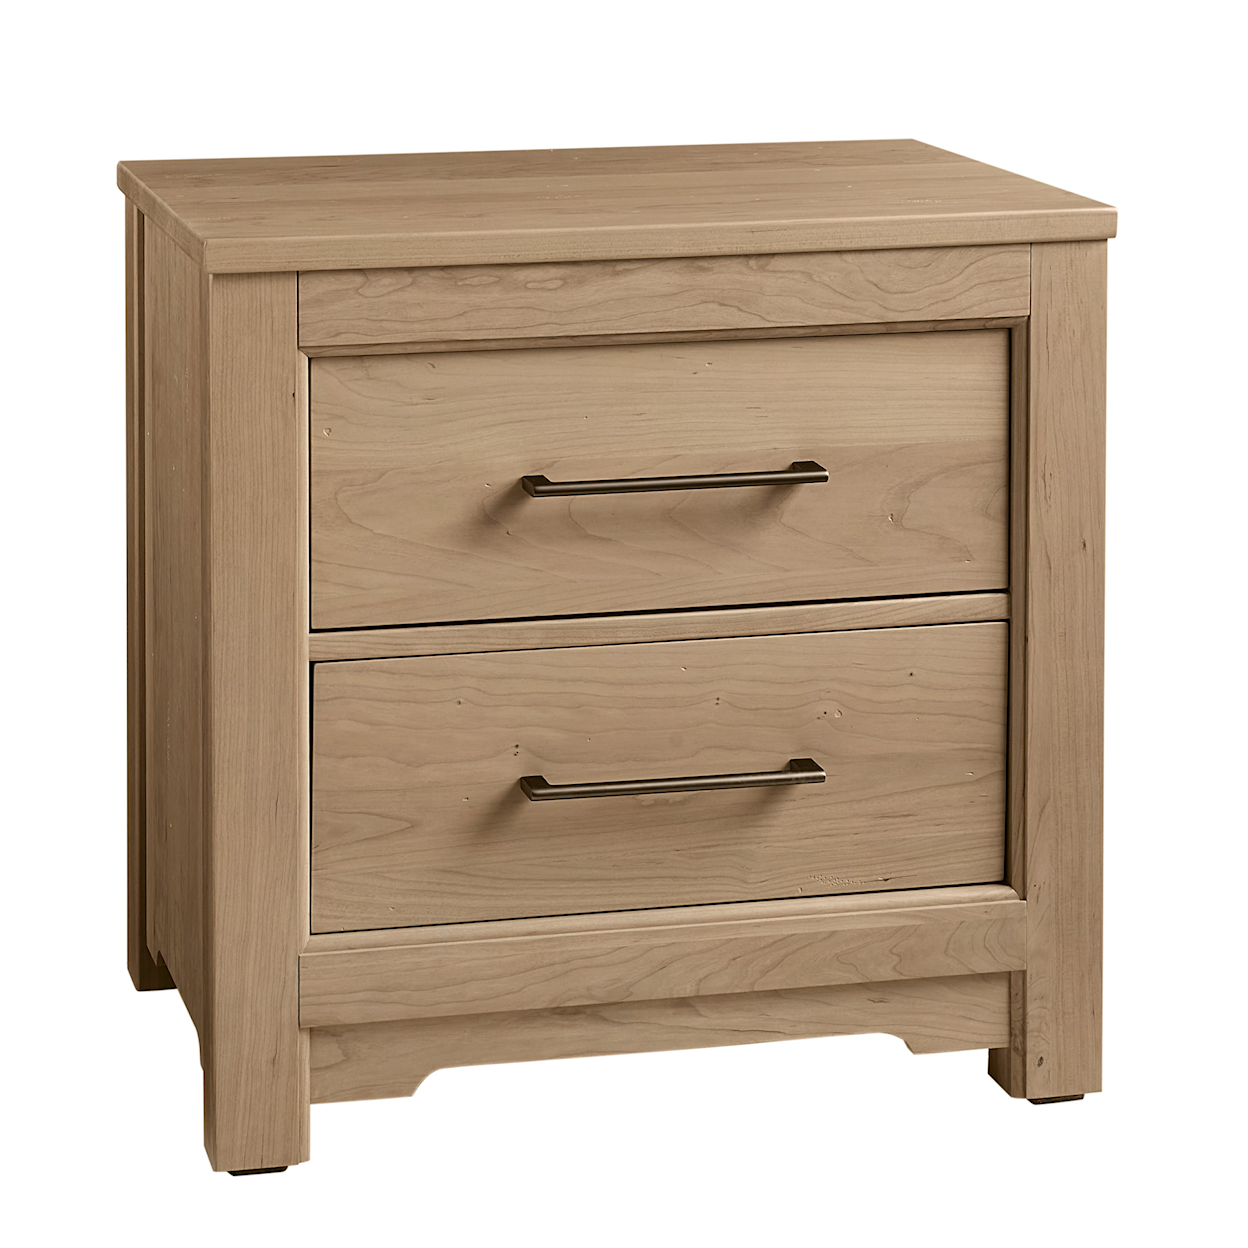 Virginia House Crafted Cherry - Bleached 2-Drawer Nightstand